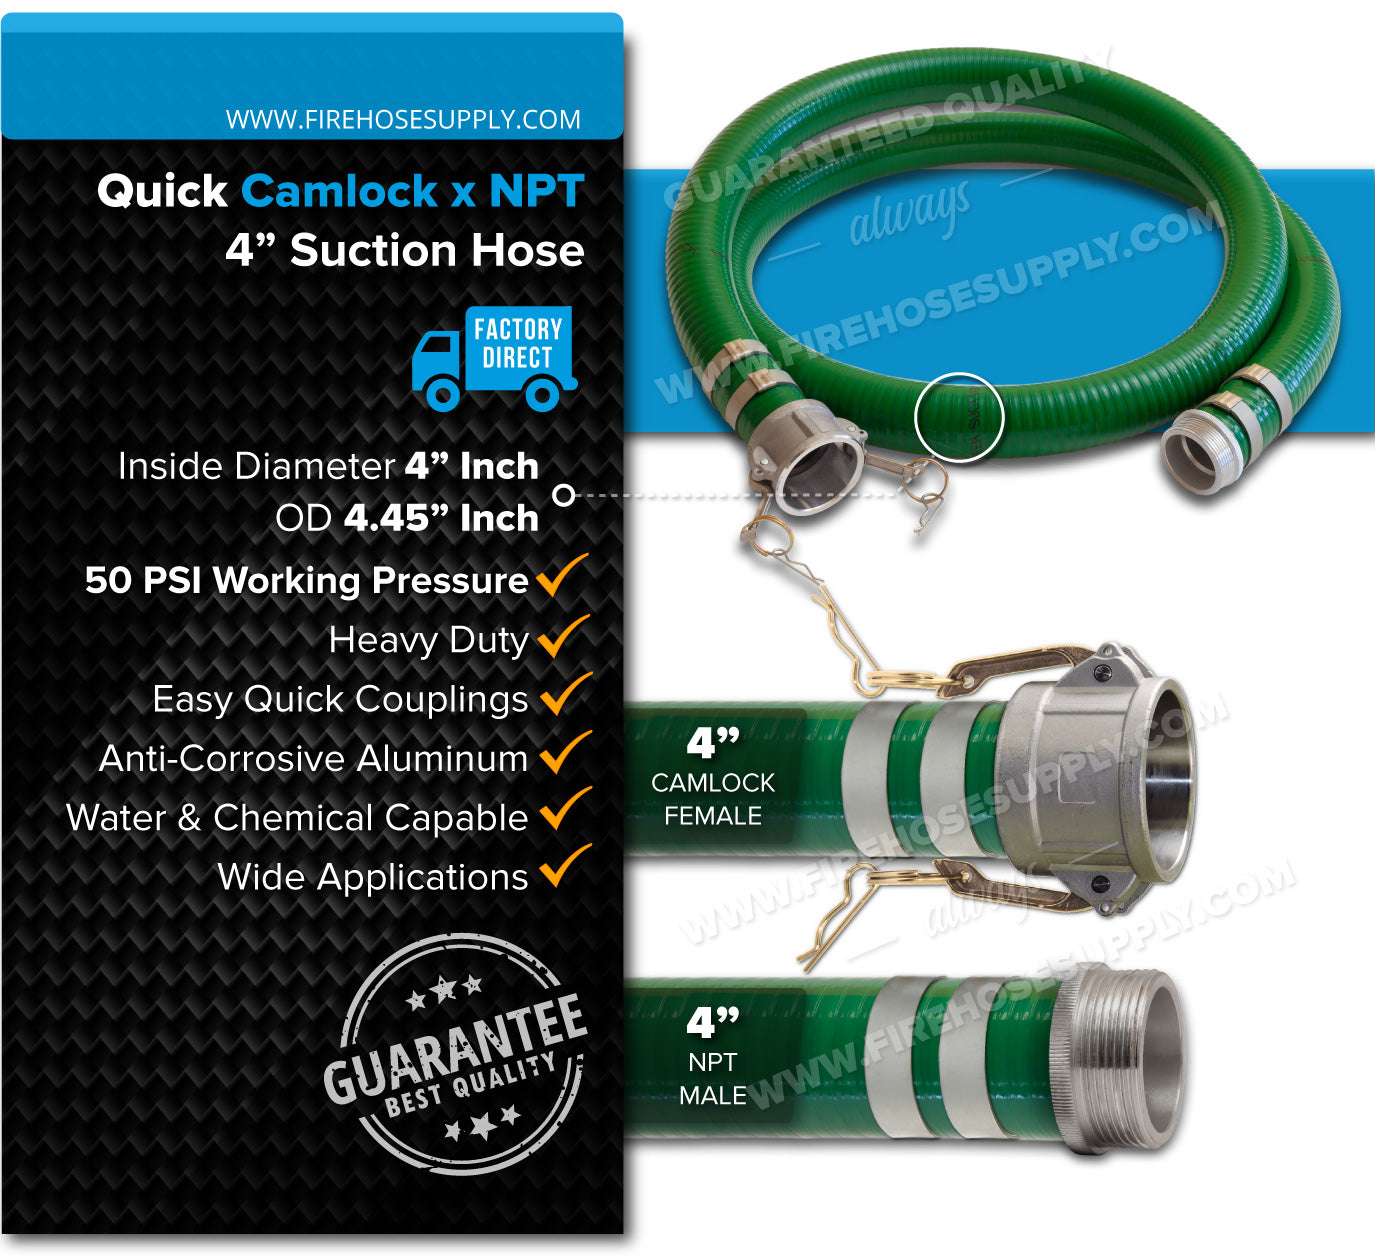 4 Inch Camlock Female x NPT Male Green Suction Hose Overview